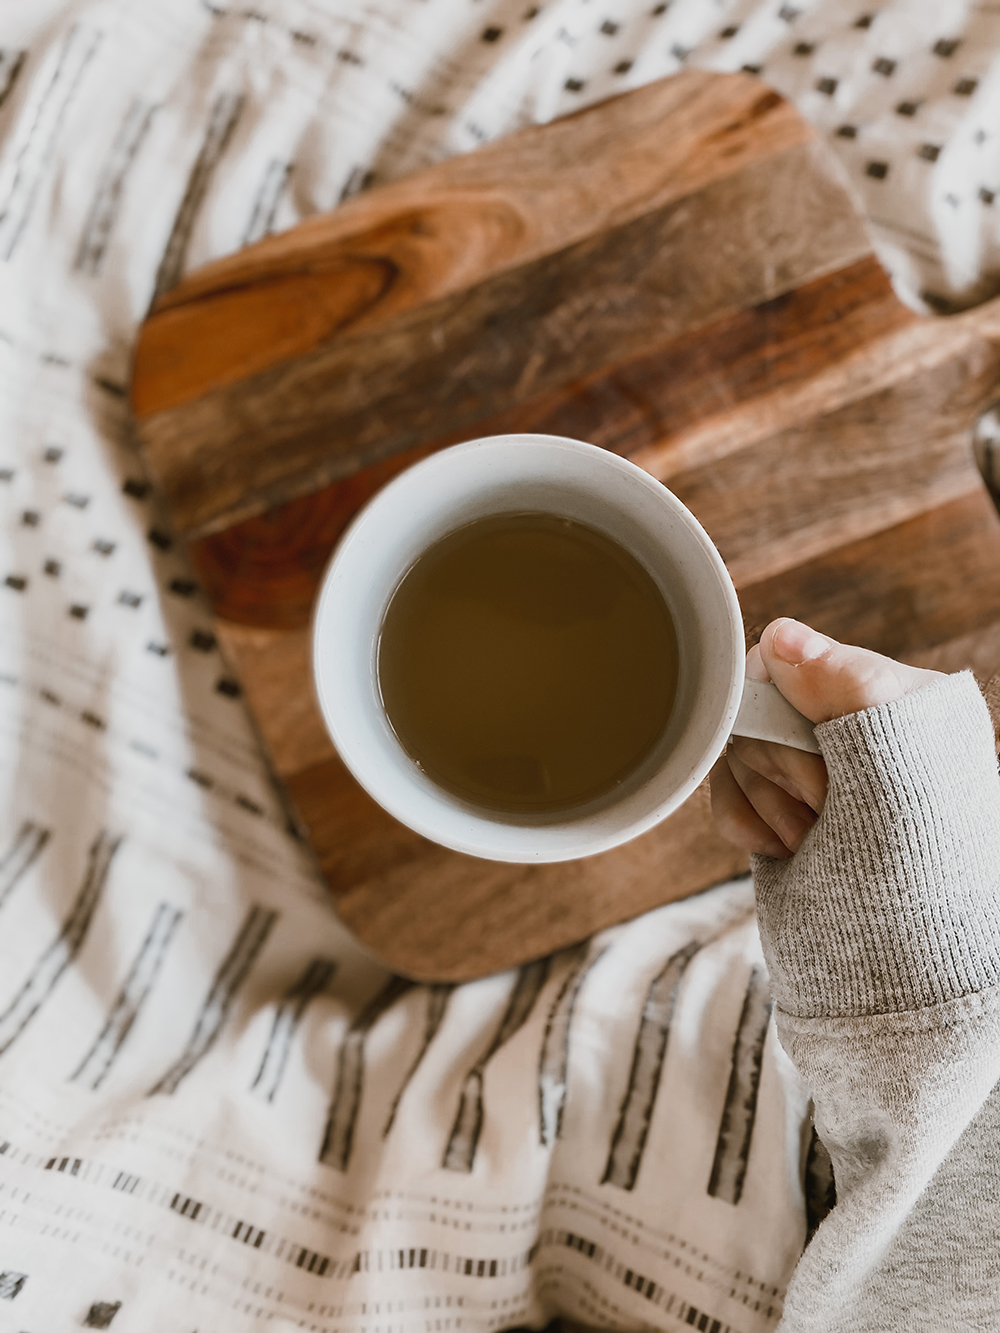 I'm sharing my favorite wellness tea recipe to make when I am feeling under the weather or down with something. It has totally helped in these instances. Thieves tea recipe for under-the-weather days is on the KaraLayne.com for you!